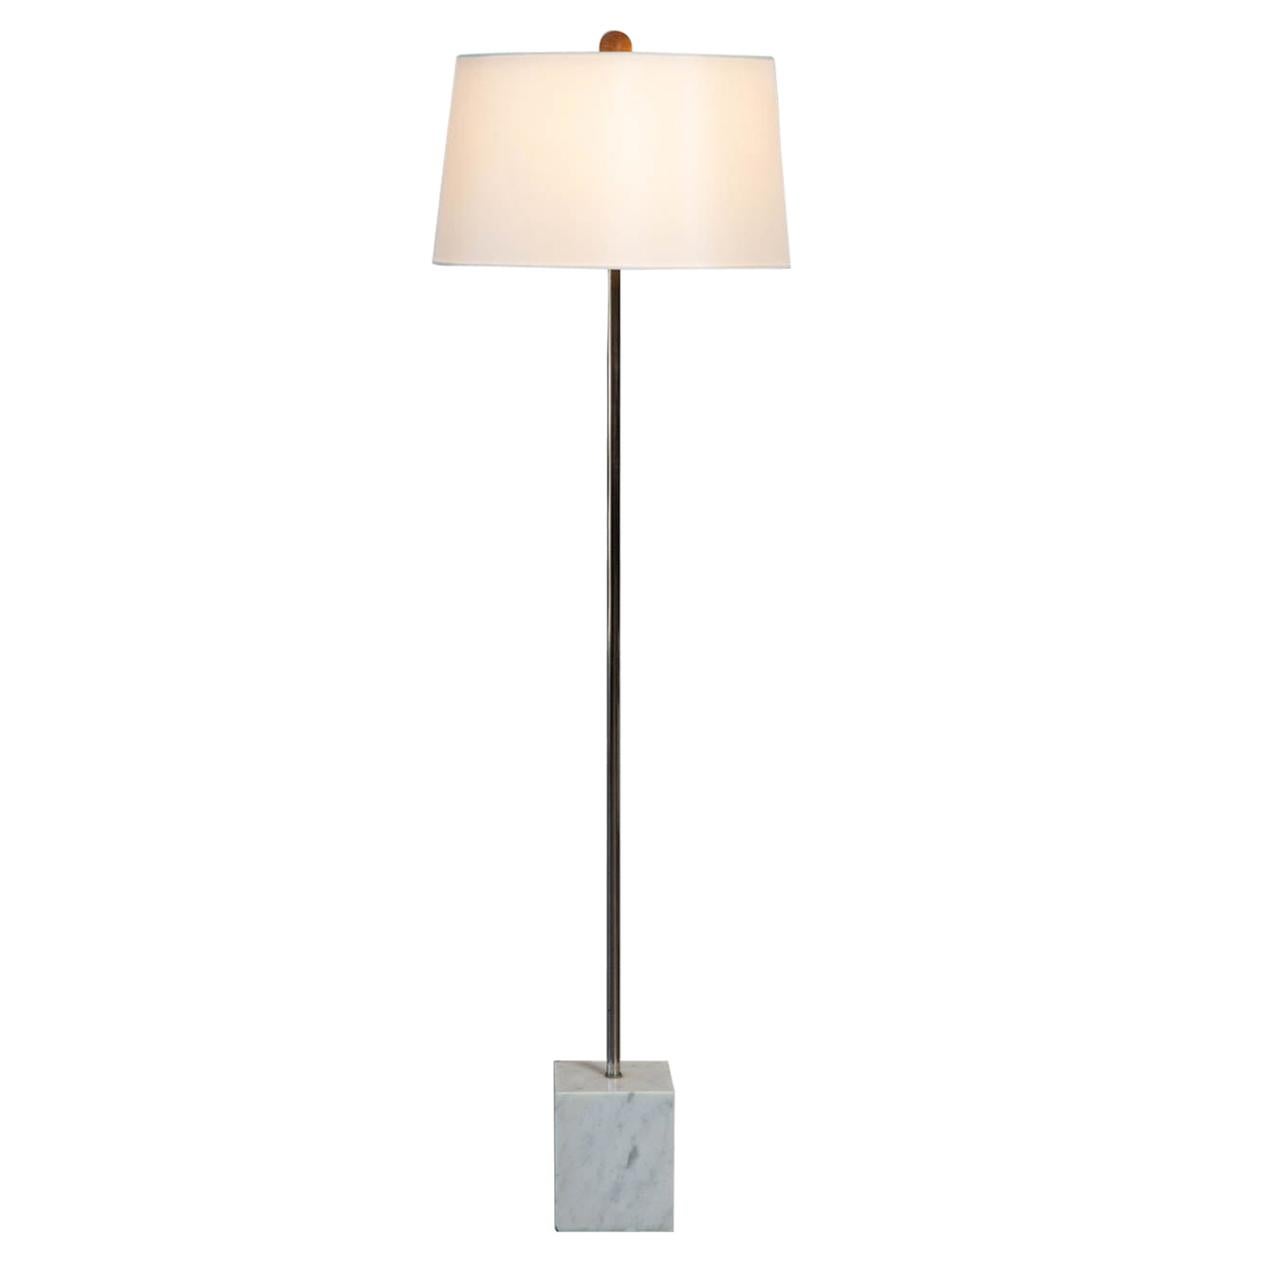 Laurel Lamp Co. Chrome Floor Lamp with Marble Base